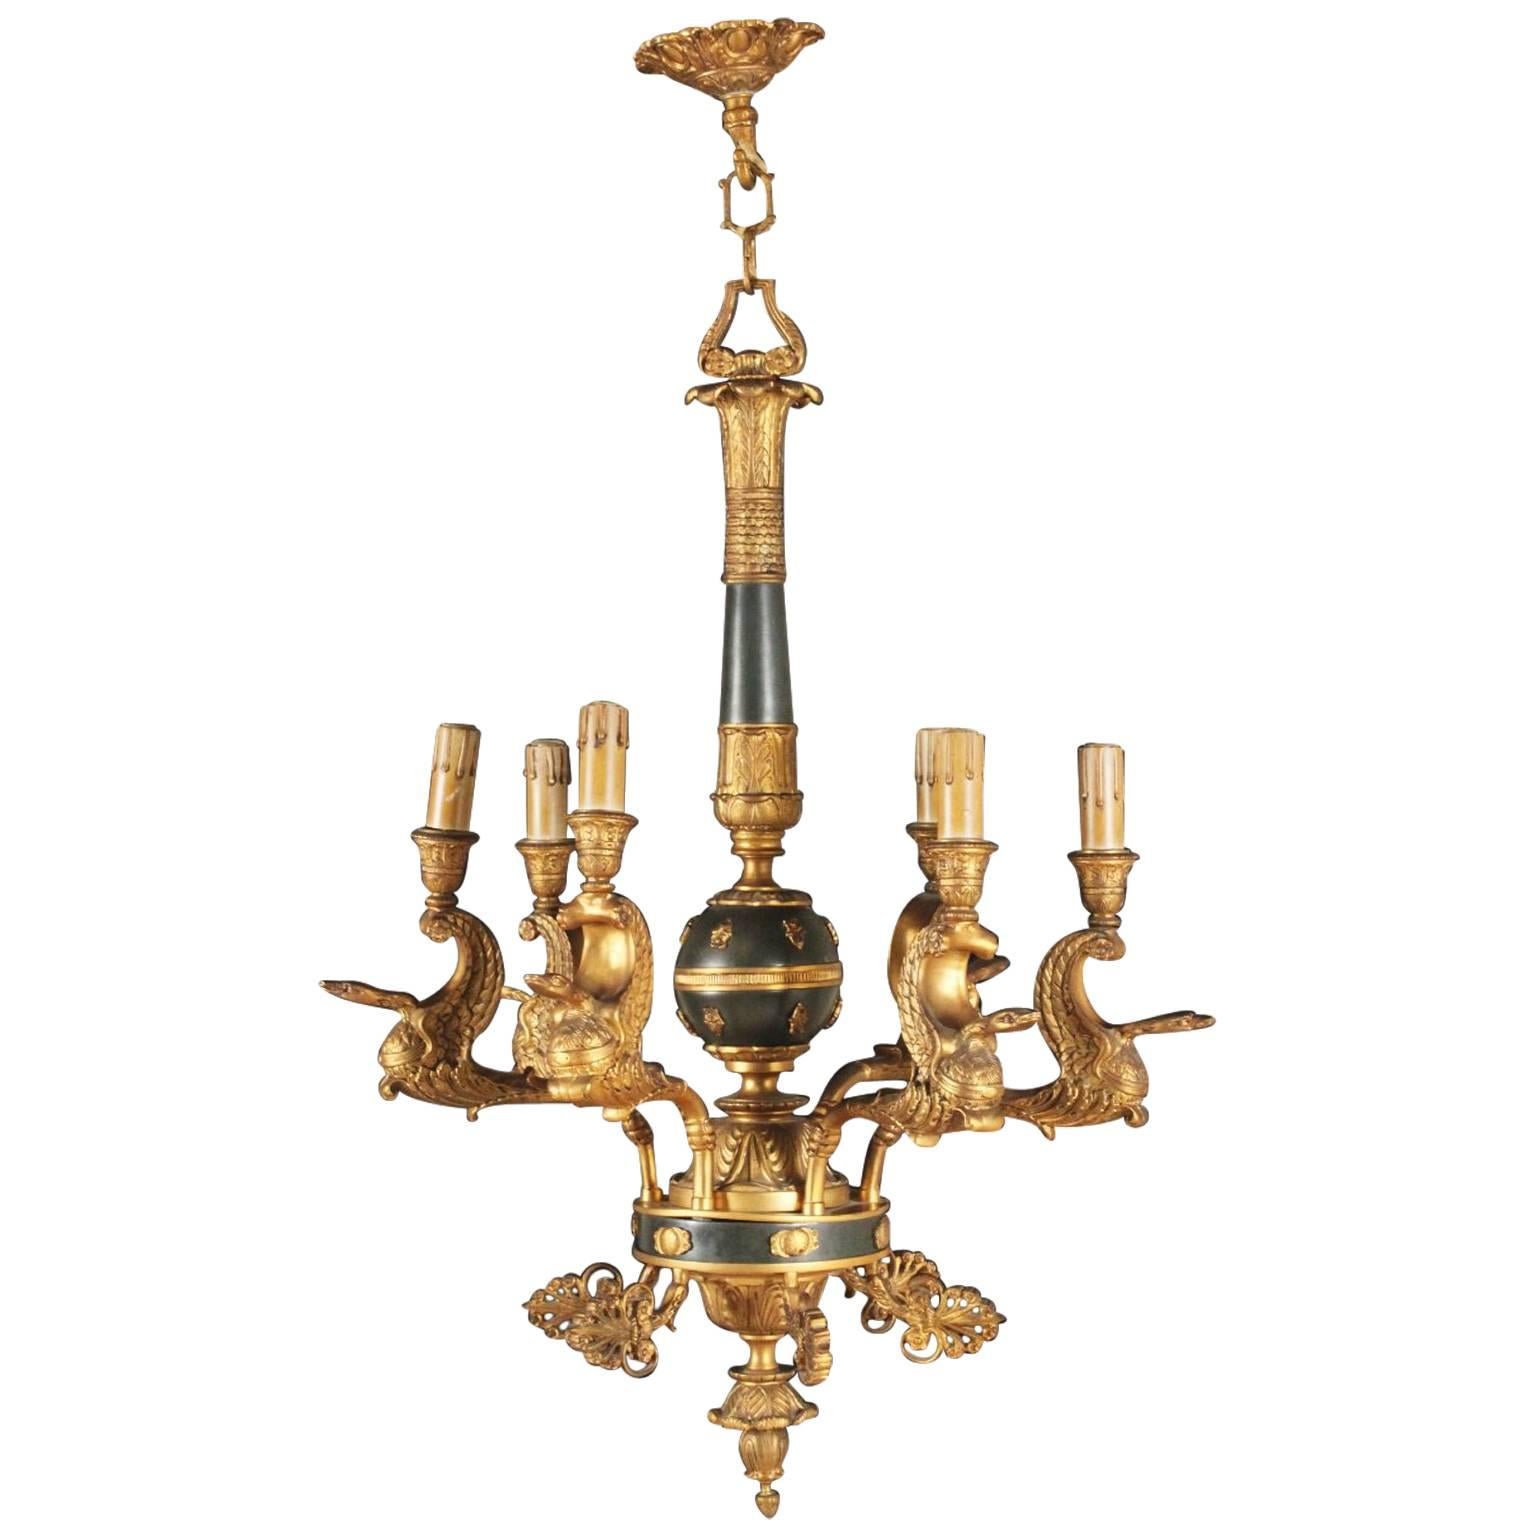 Gilded and Burnished Bronze Chandelier with Empire Design, Italy, 19th Century